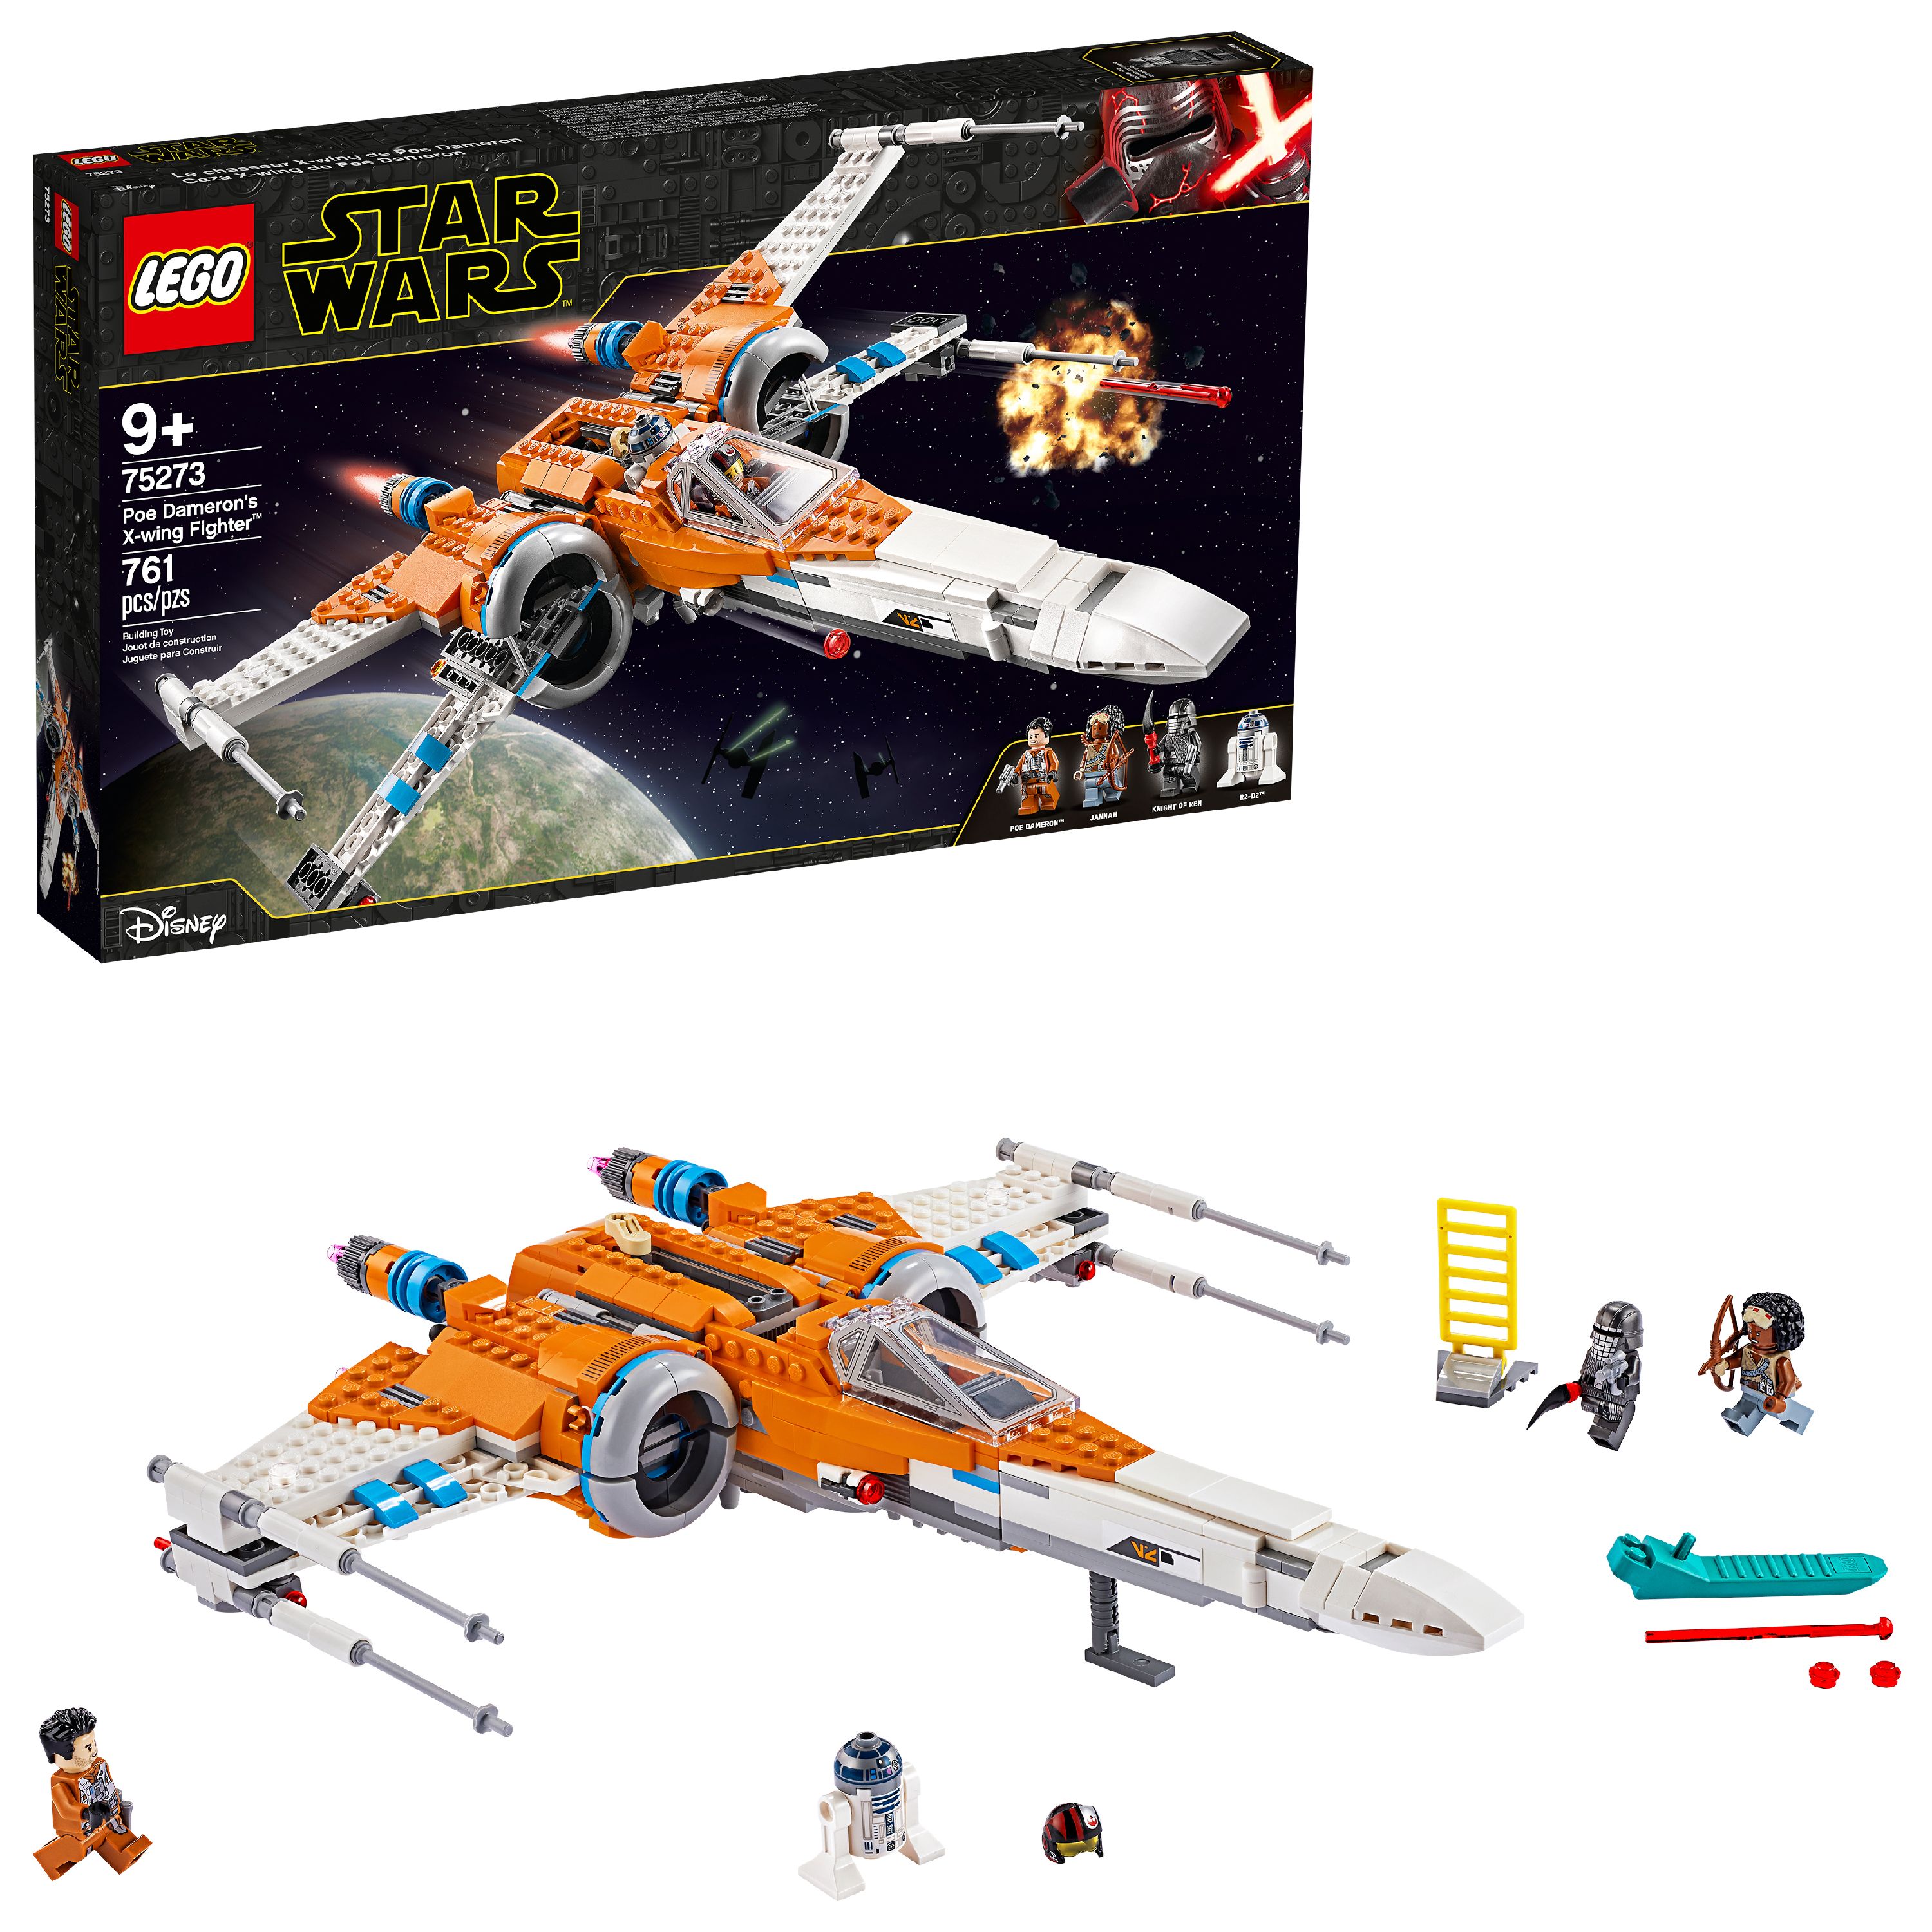 LEGO Star Wars Poe Dameron's X-wing Fighter 75273 Building Kit (761 Pieces) $72 Shipped @ Walmart.com